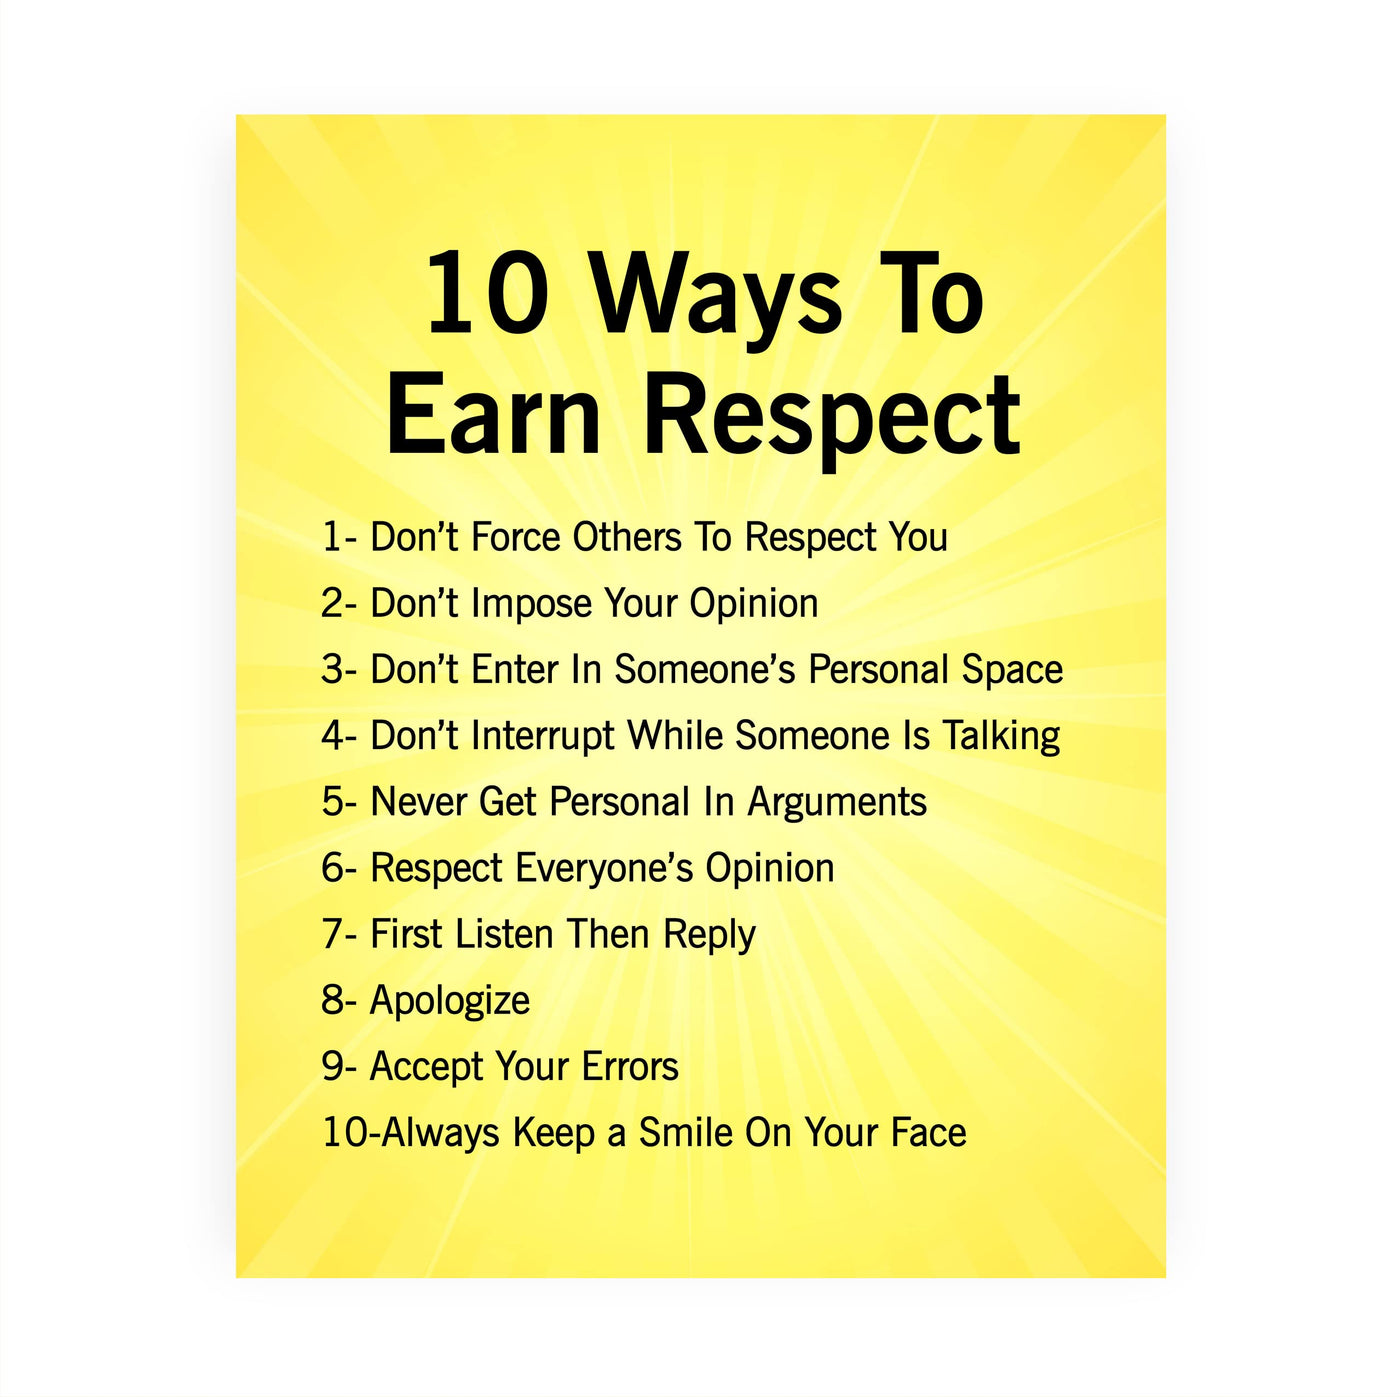 10 Ways to Earn Respect Inspirational Affirmations Wall Art -8 x 10" Motivational Quotes Print -Ready to Frame. Positive Decoration for Home-Office-Classroom-Success Decor. Gifts for Inspiration!